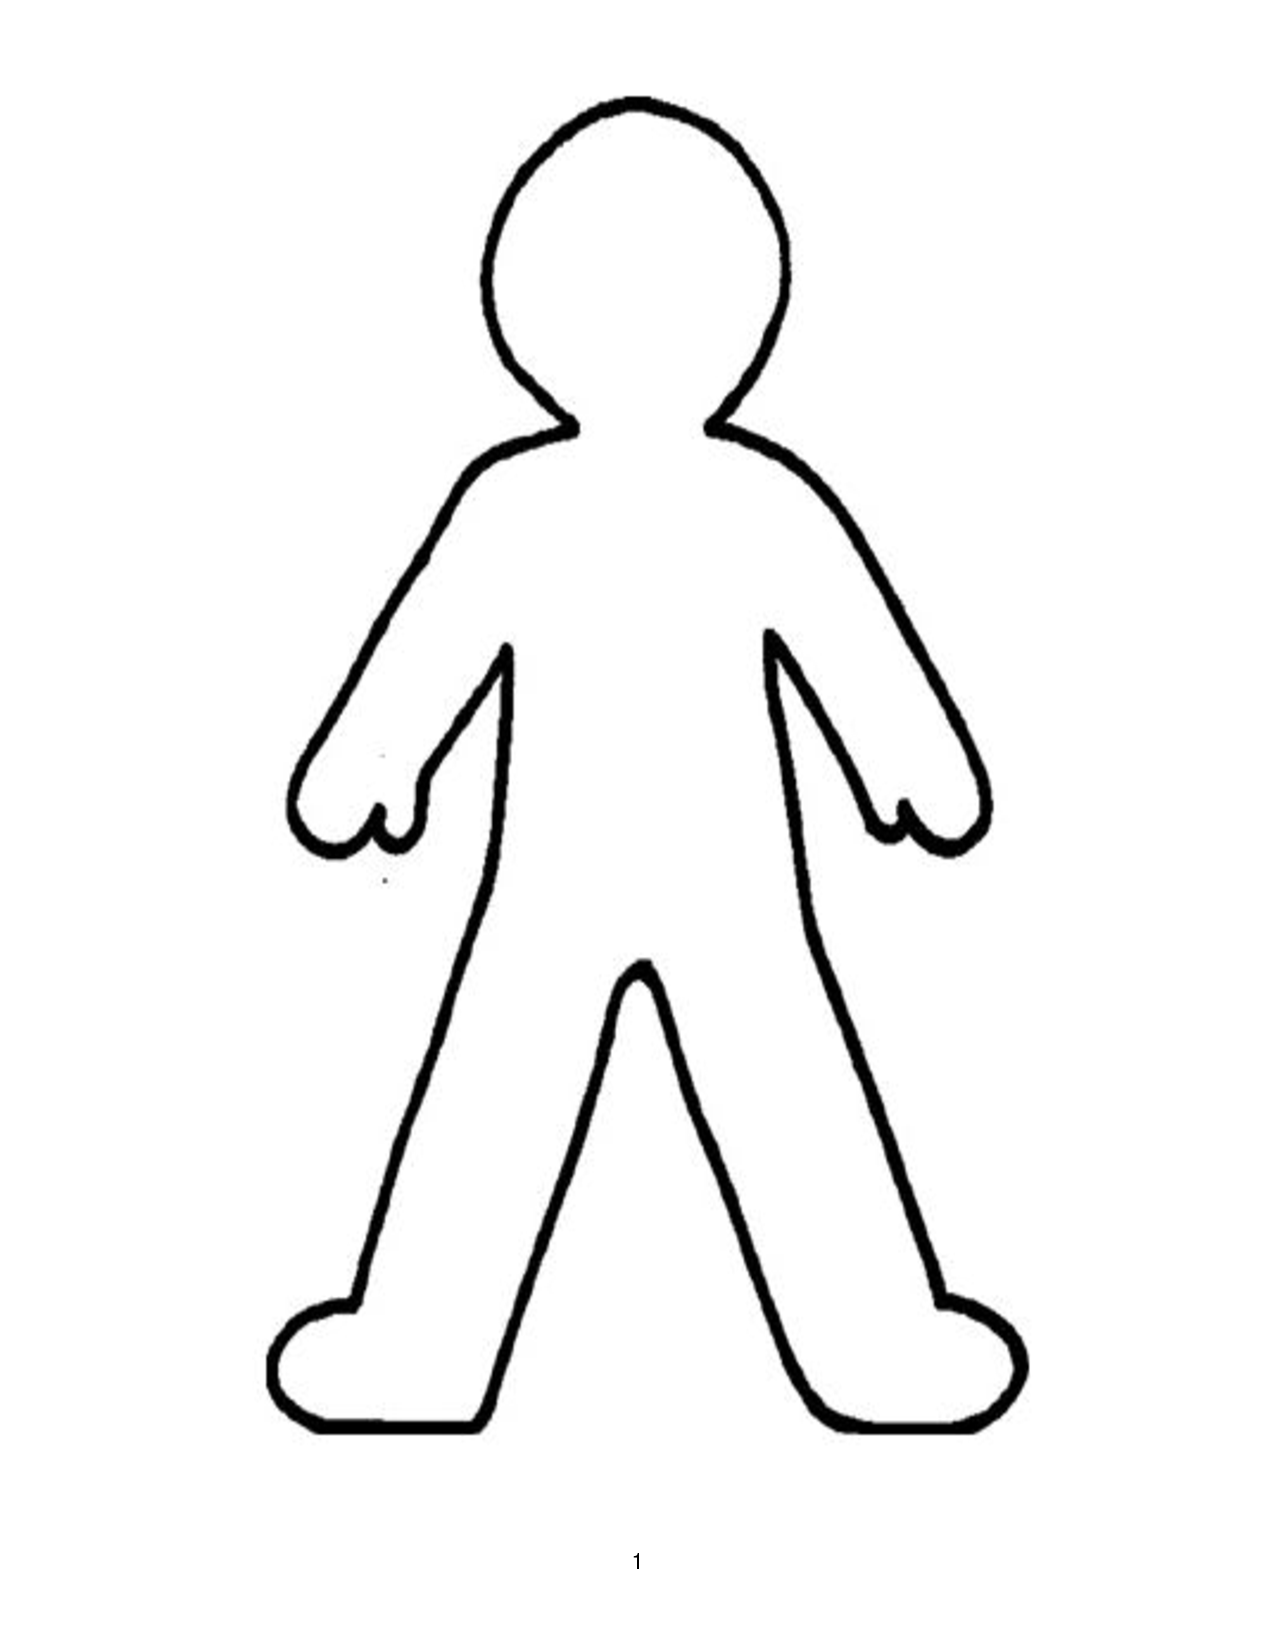 Blank Body Image - ClipArt Best